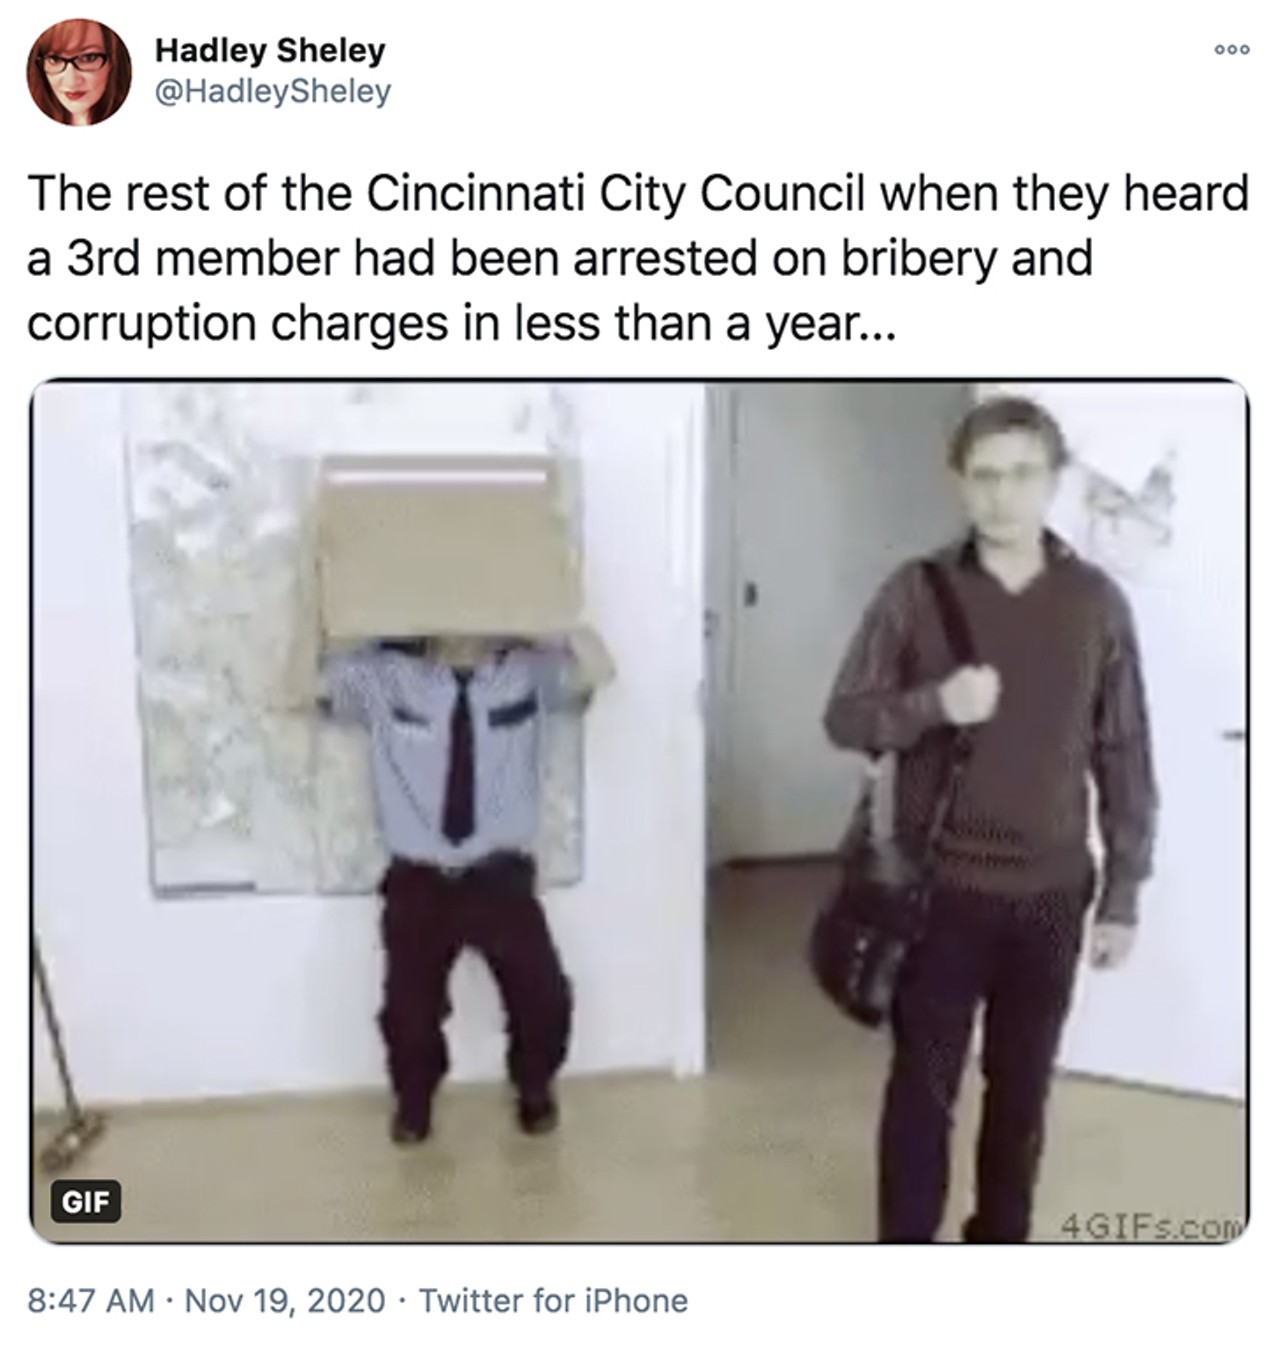 These Hilarious Twitter Reactions Illustrate the Shit Show That is Cincinnati City Council